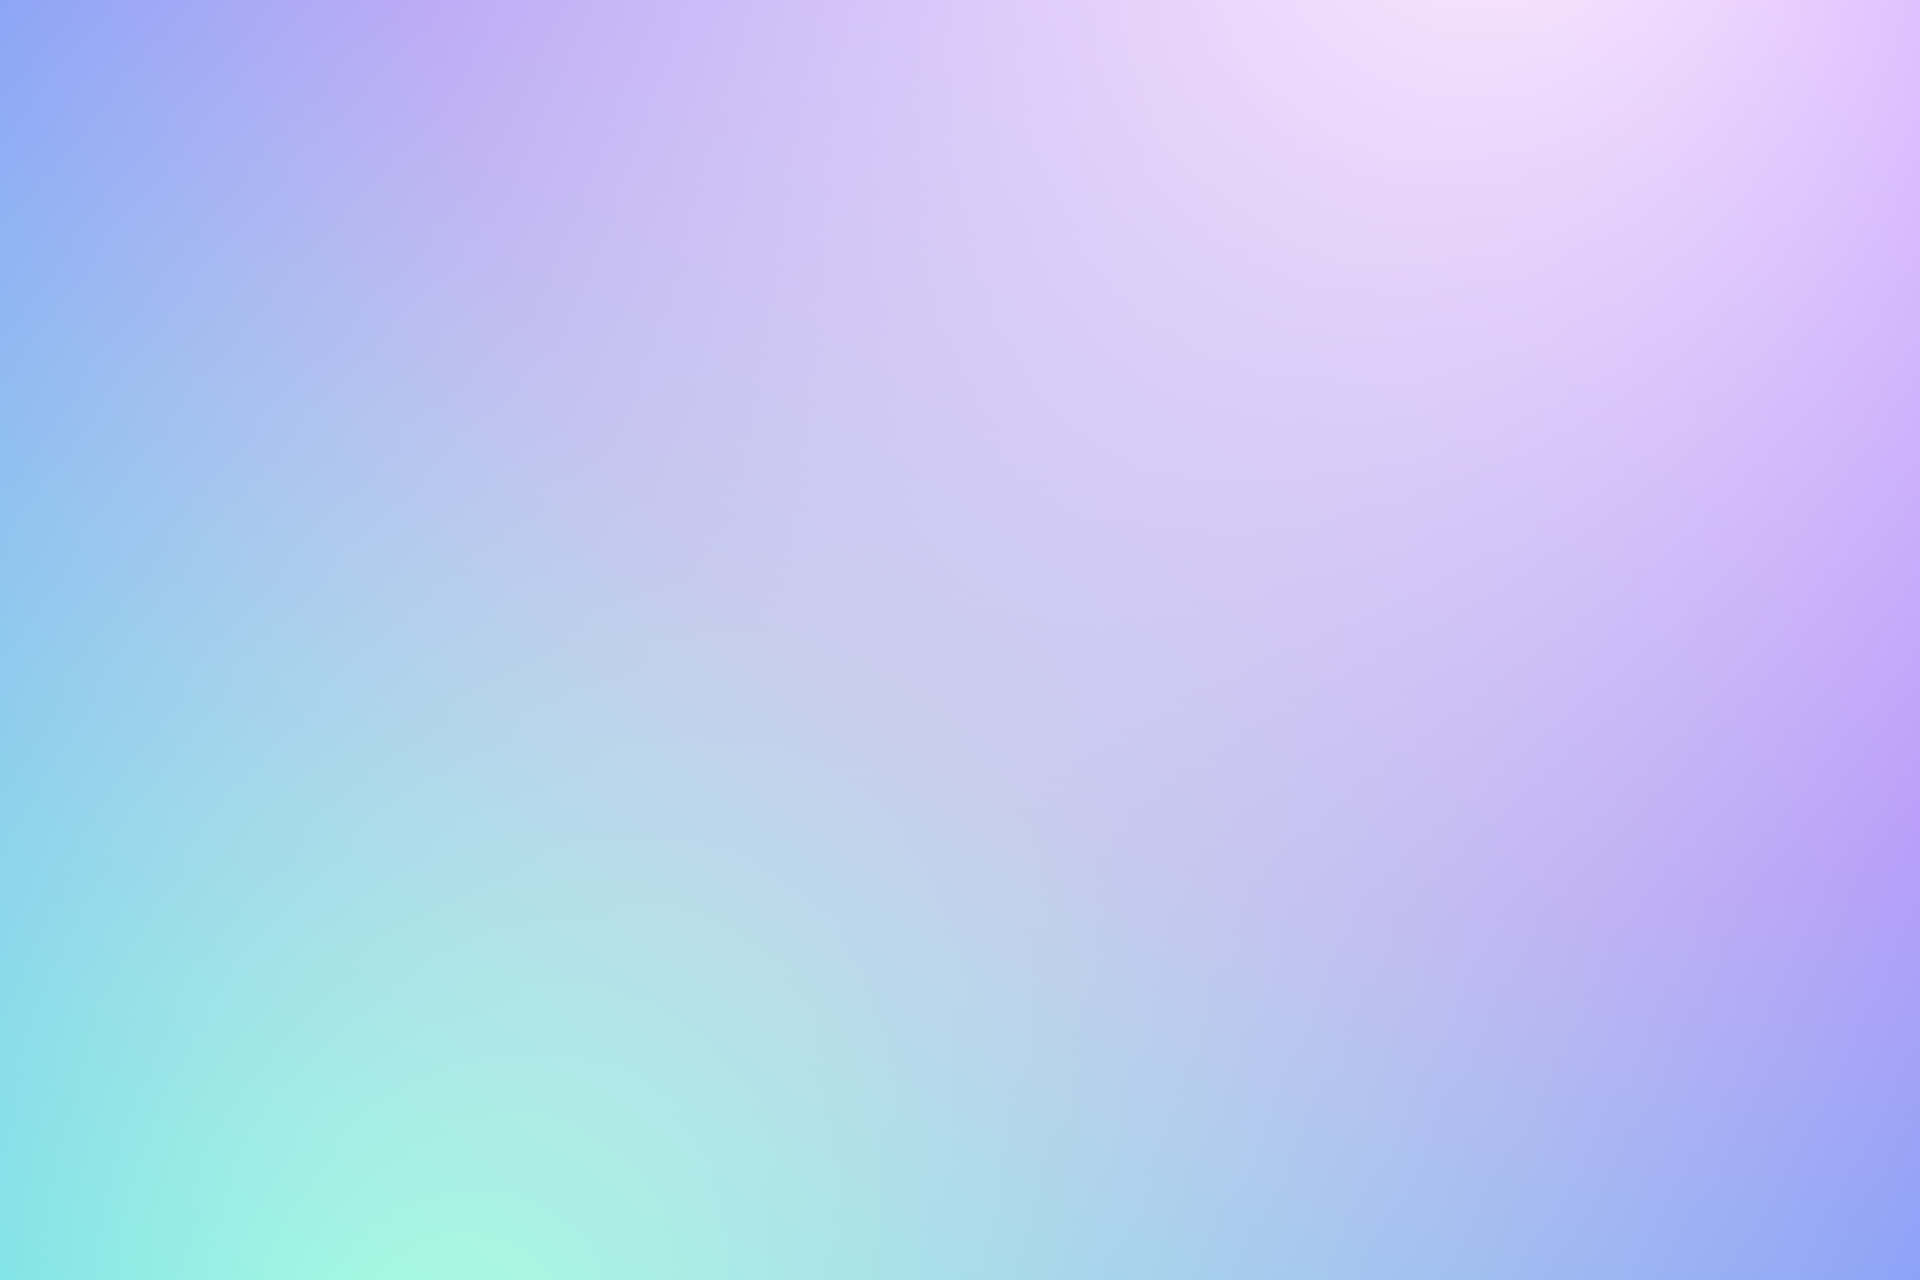 Blue Ombre Background Light Blue And Light Pink Finish